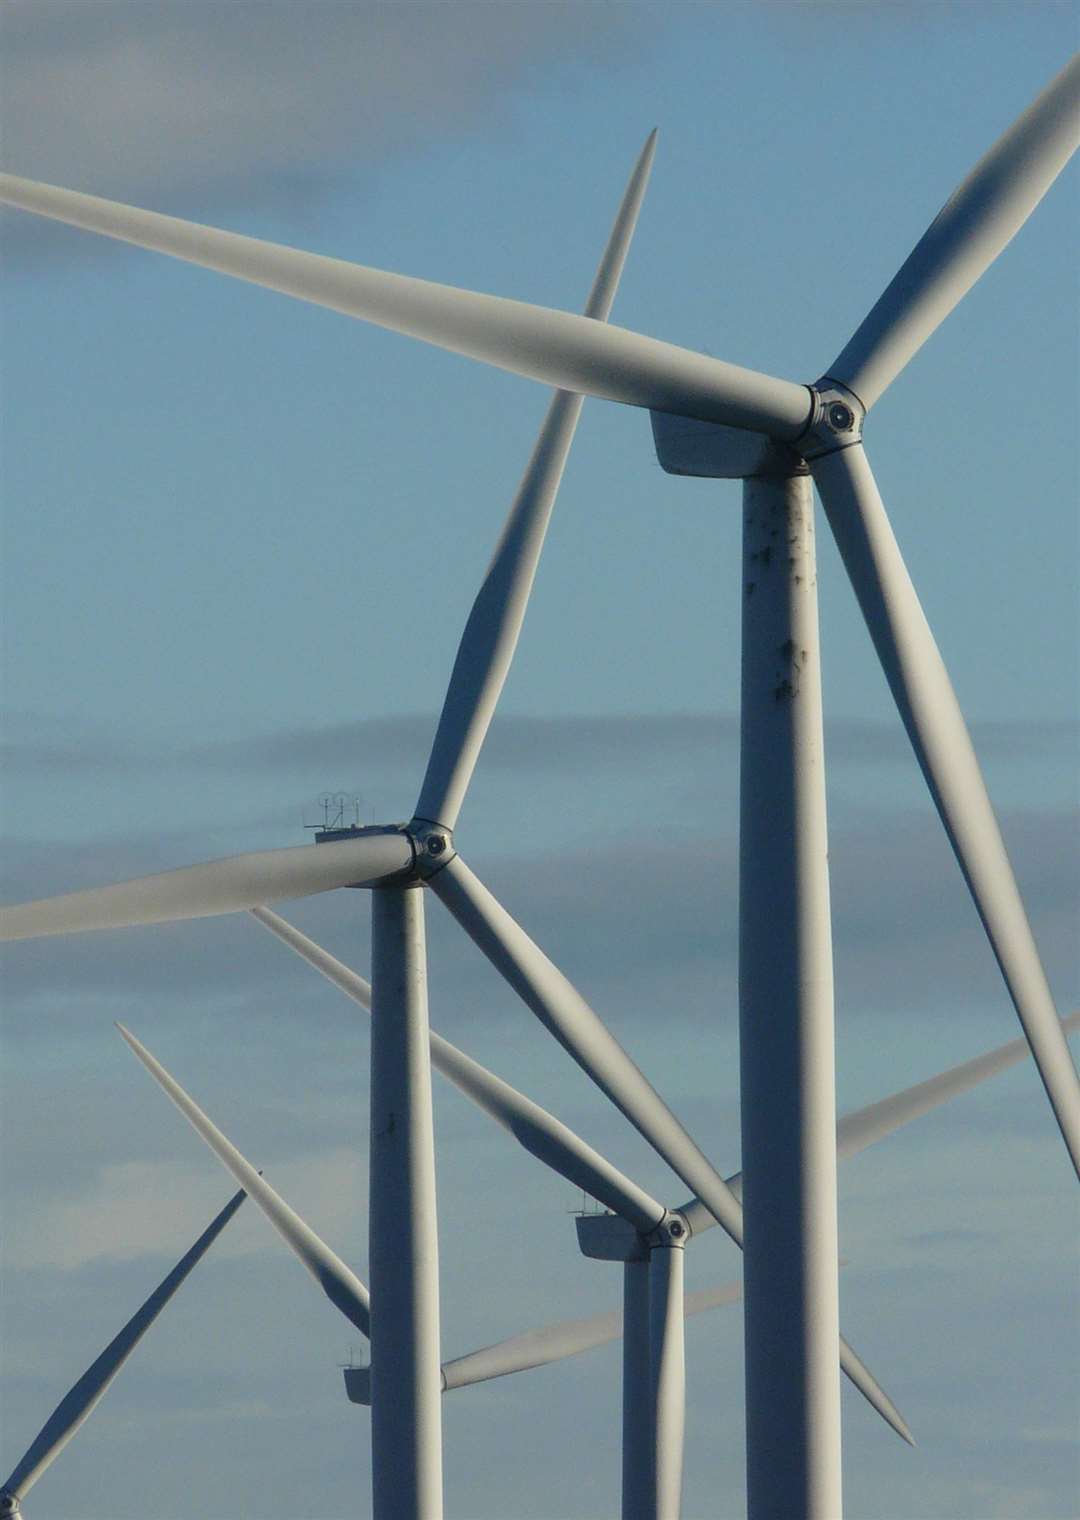 Scotland Against Spin wants communities to have a greater capacity to influence planning decisions for onshore wind farms.  Photo: Alan Hendry